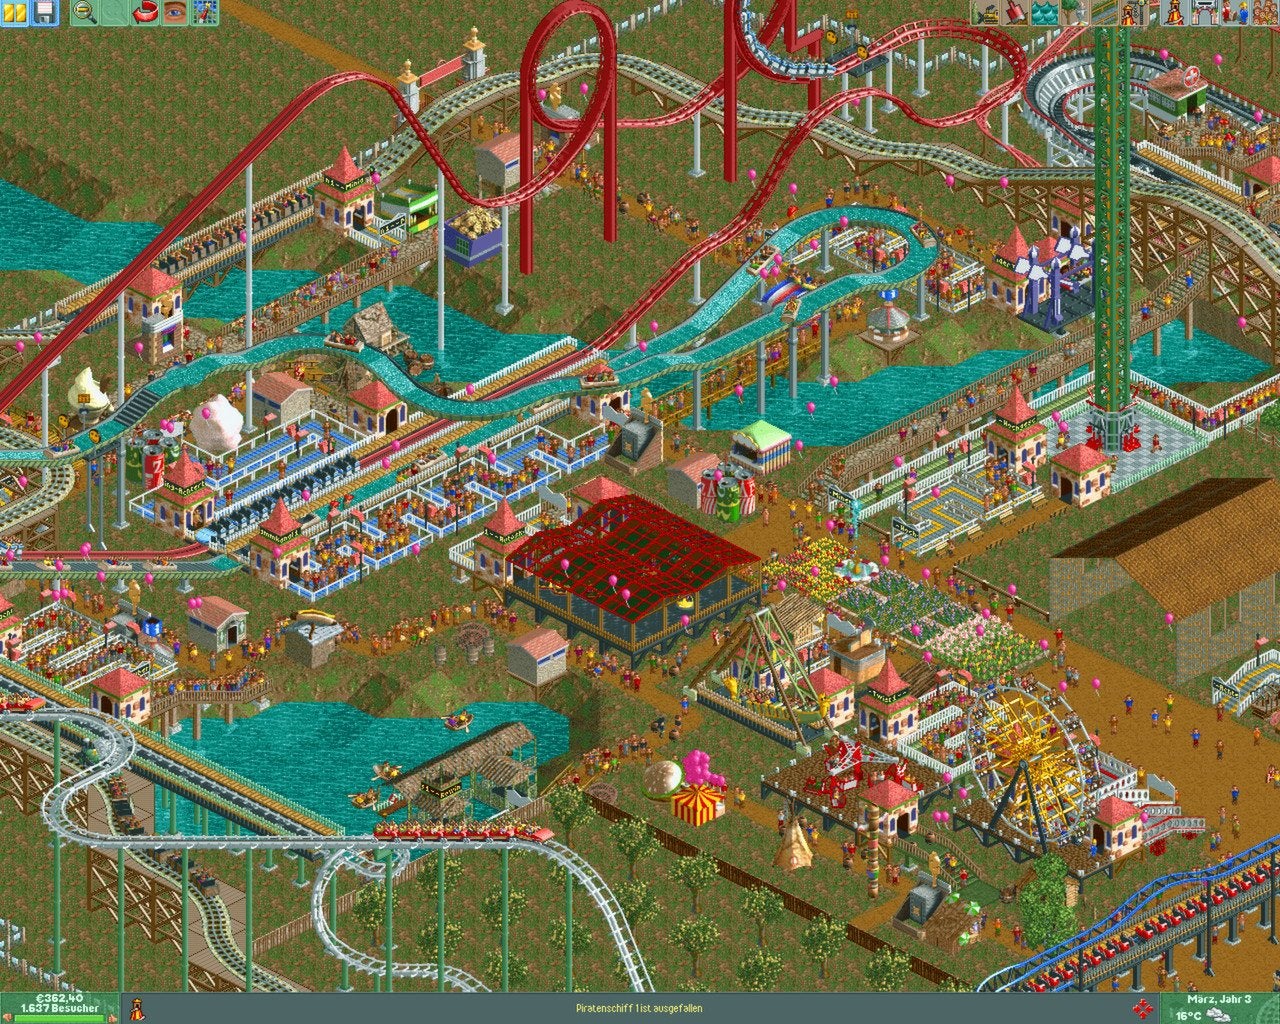 A park with a few rides and attractions in the Sandbox game Rollercoaster Tycoon 2.